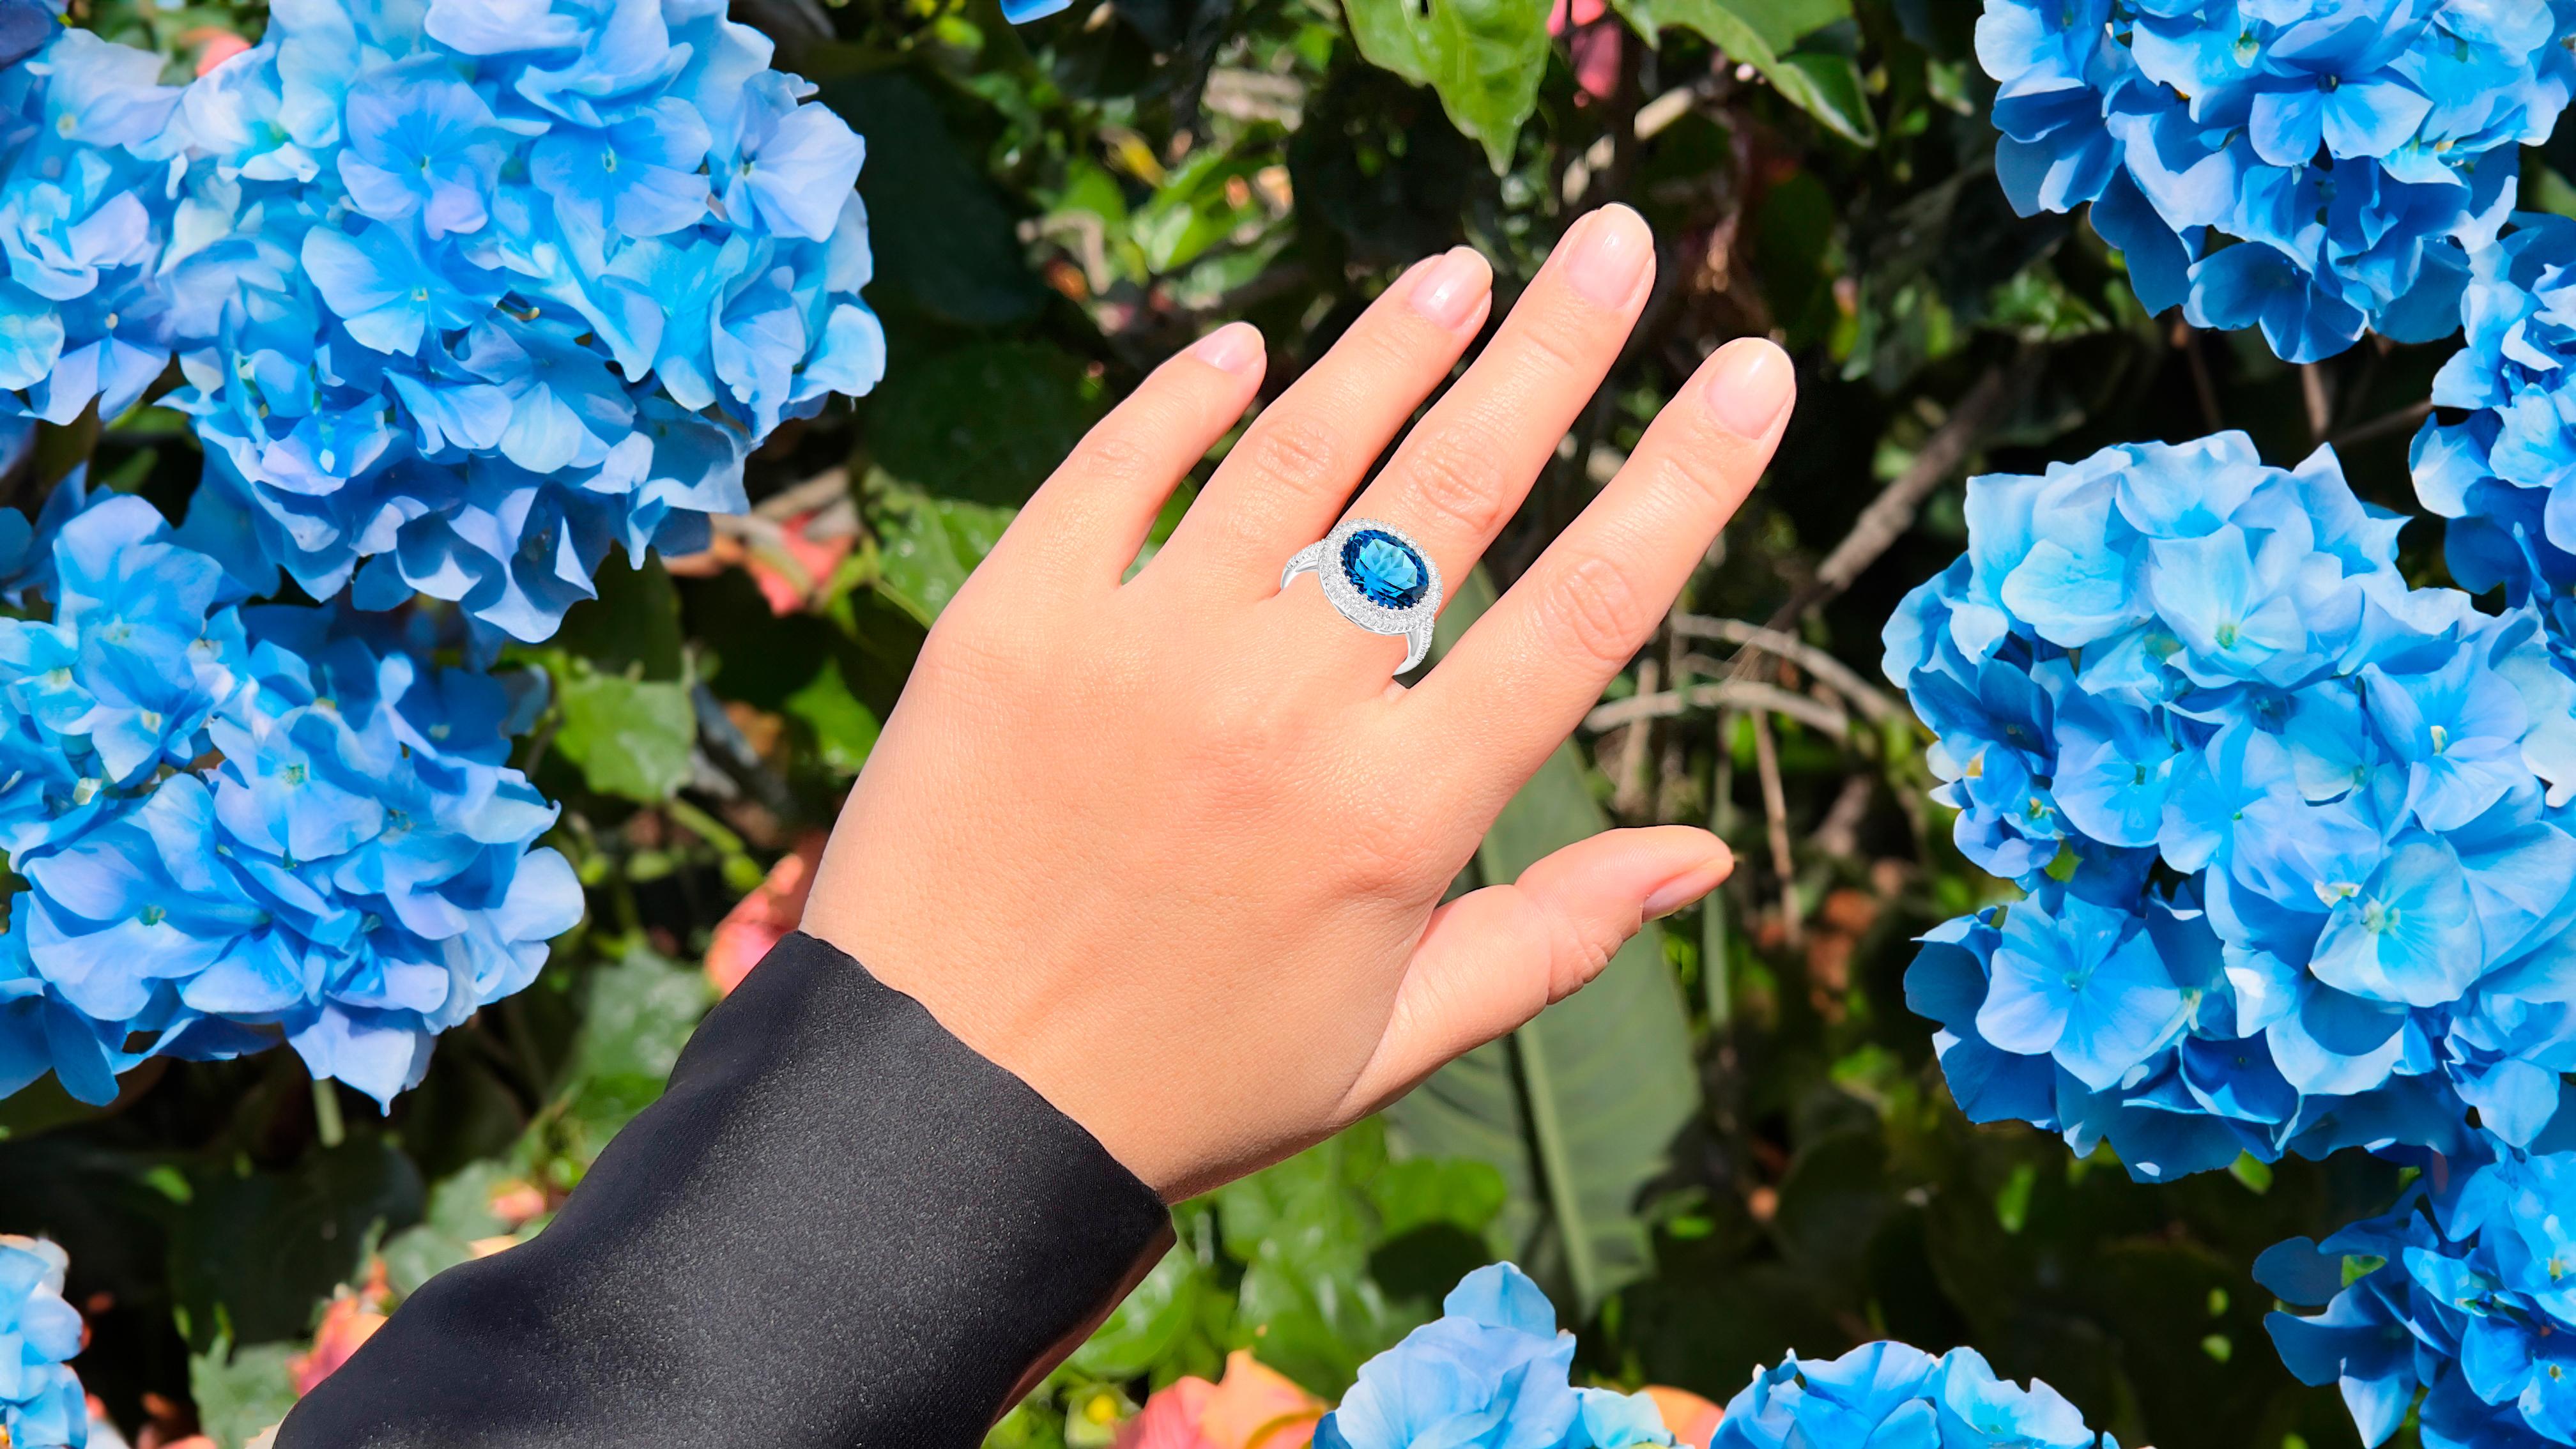 It comes with the Gemological Appraisal by GIA GG/AJP
All Gemstones are Natural
London Blue Topaz = 4.13 Carat
36 Round Diamonds = 0.40 Carats
Metal: 18K White Gold
Ring Size: 7* US
*It can be resized complimentary
